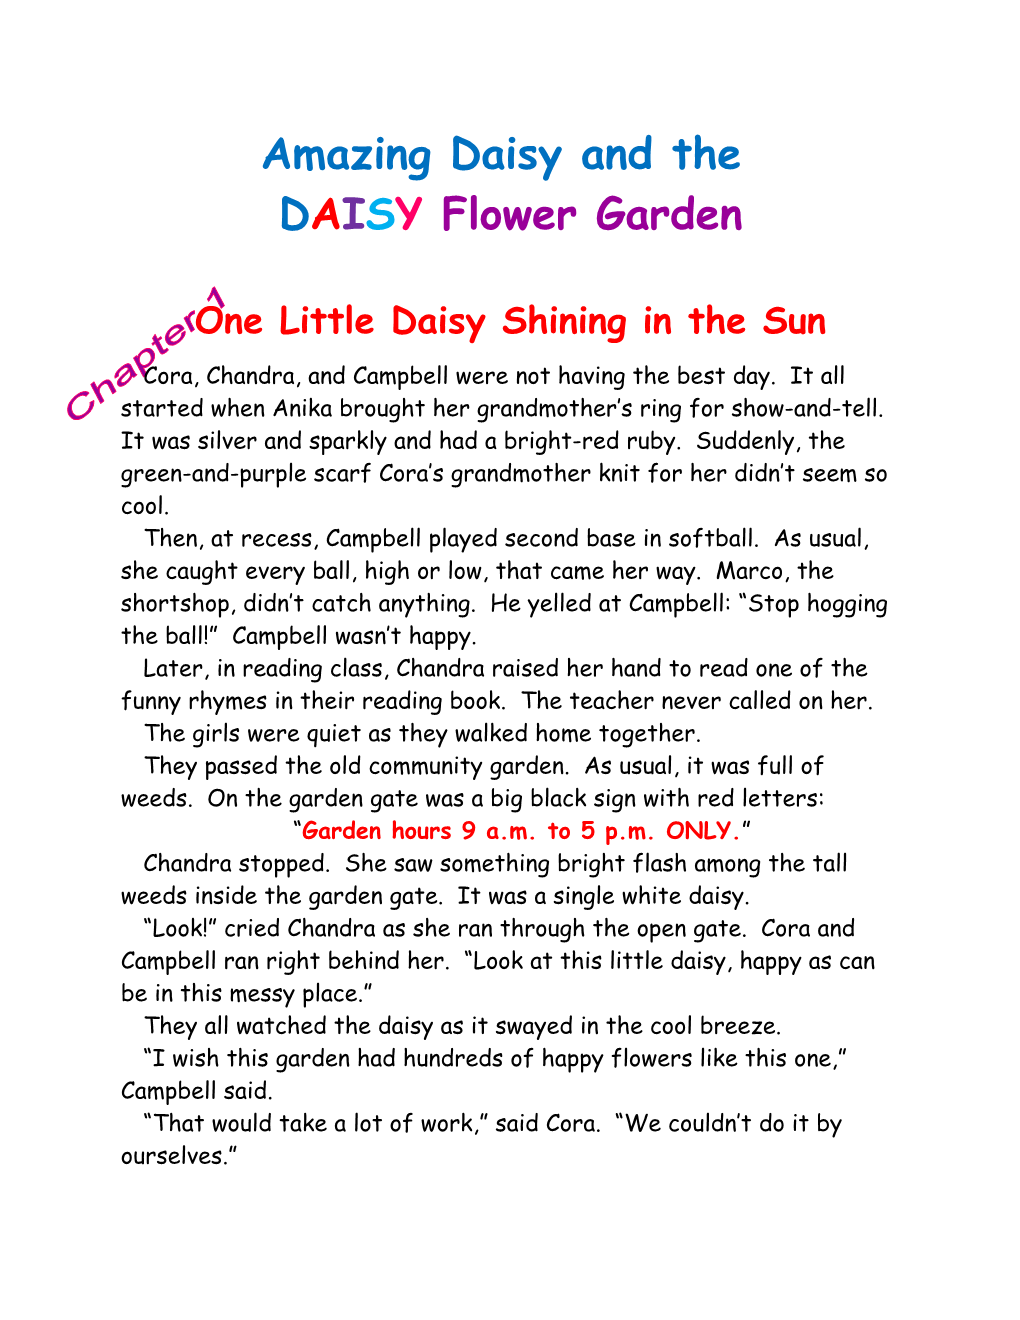 Amazing Daisy and The